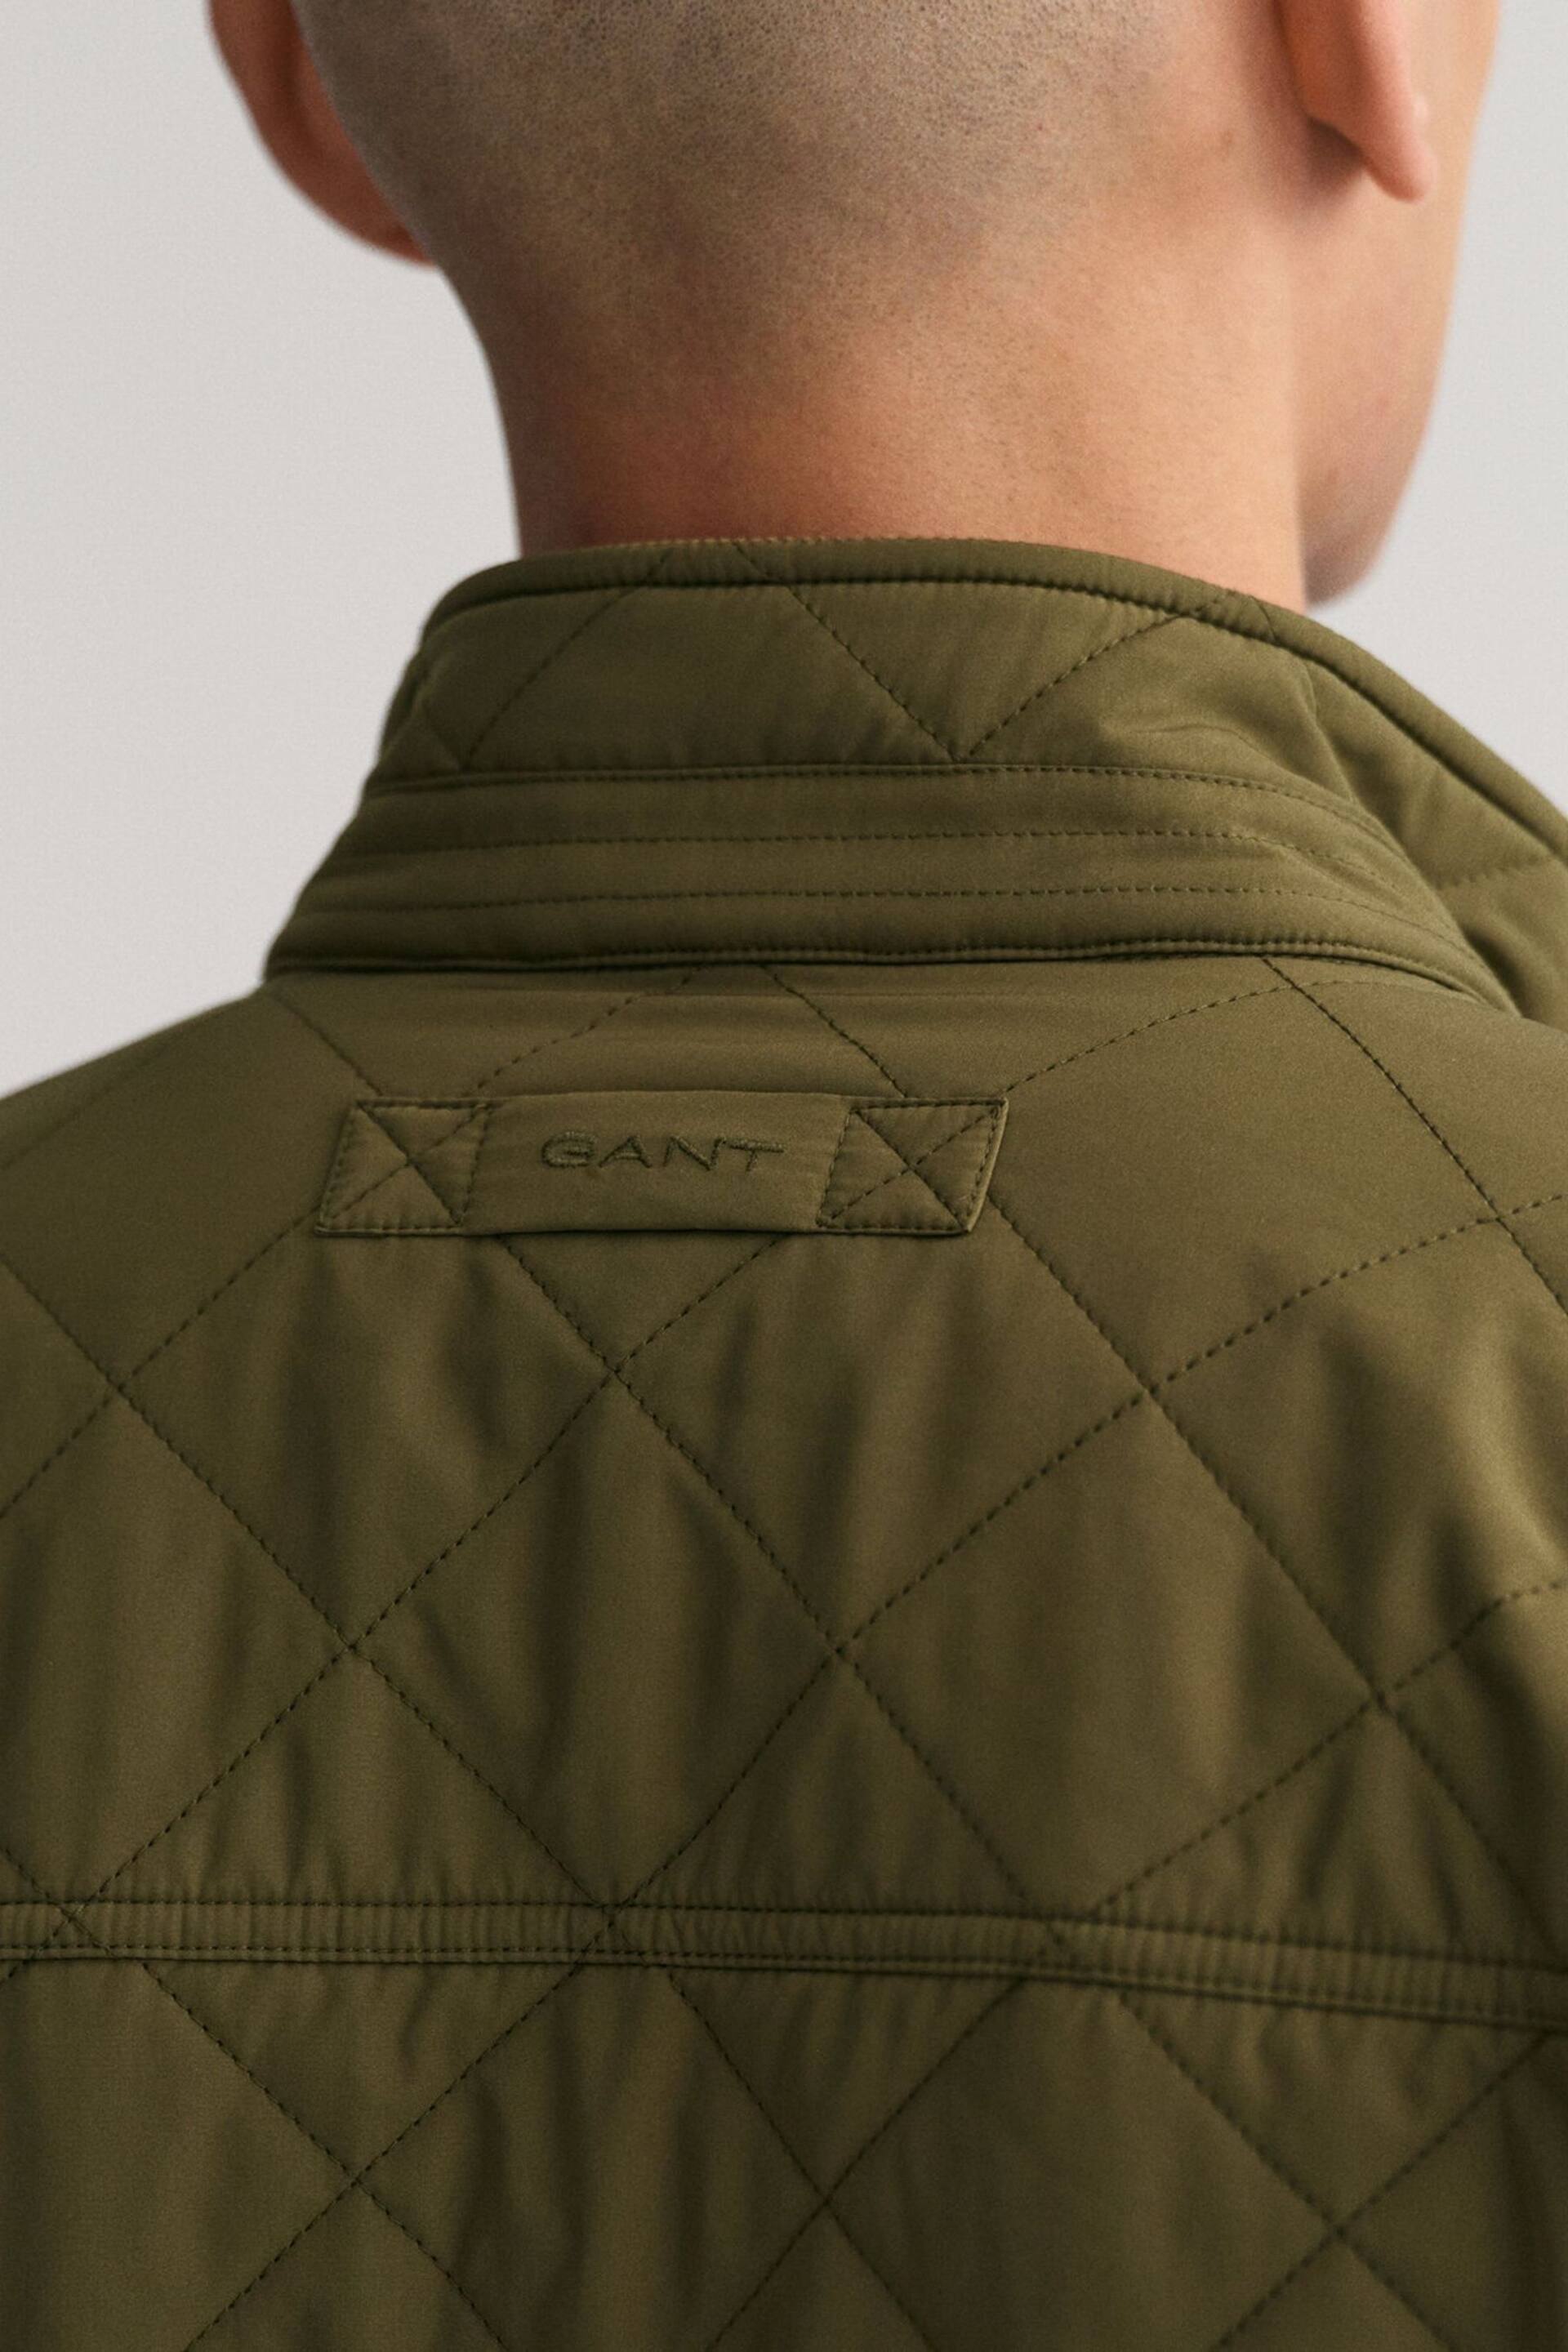 GANT Quilted Windcheater Jacket - Image 4 of 6